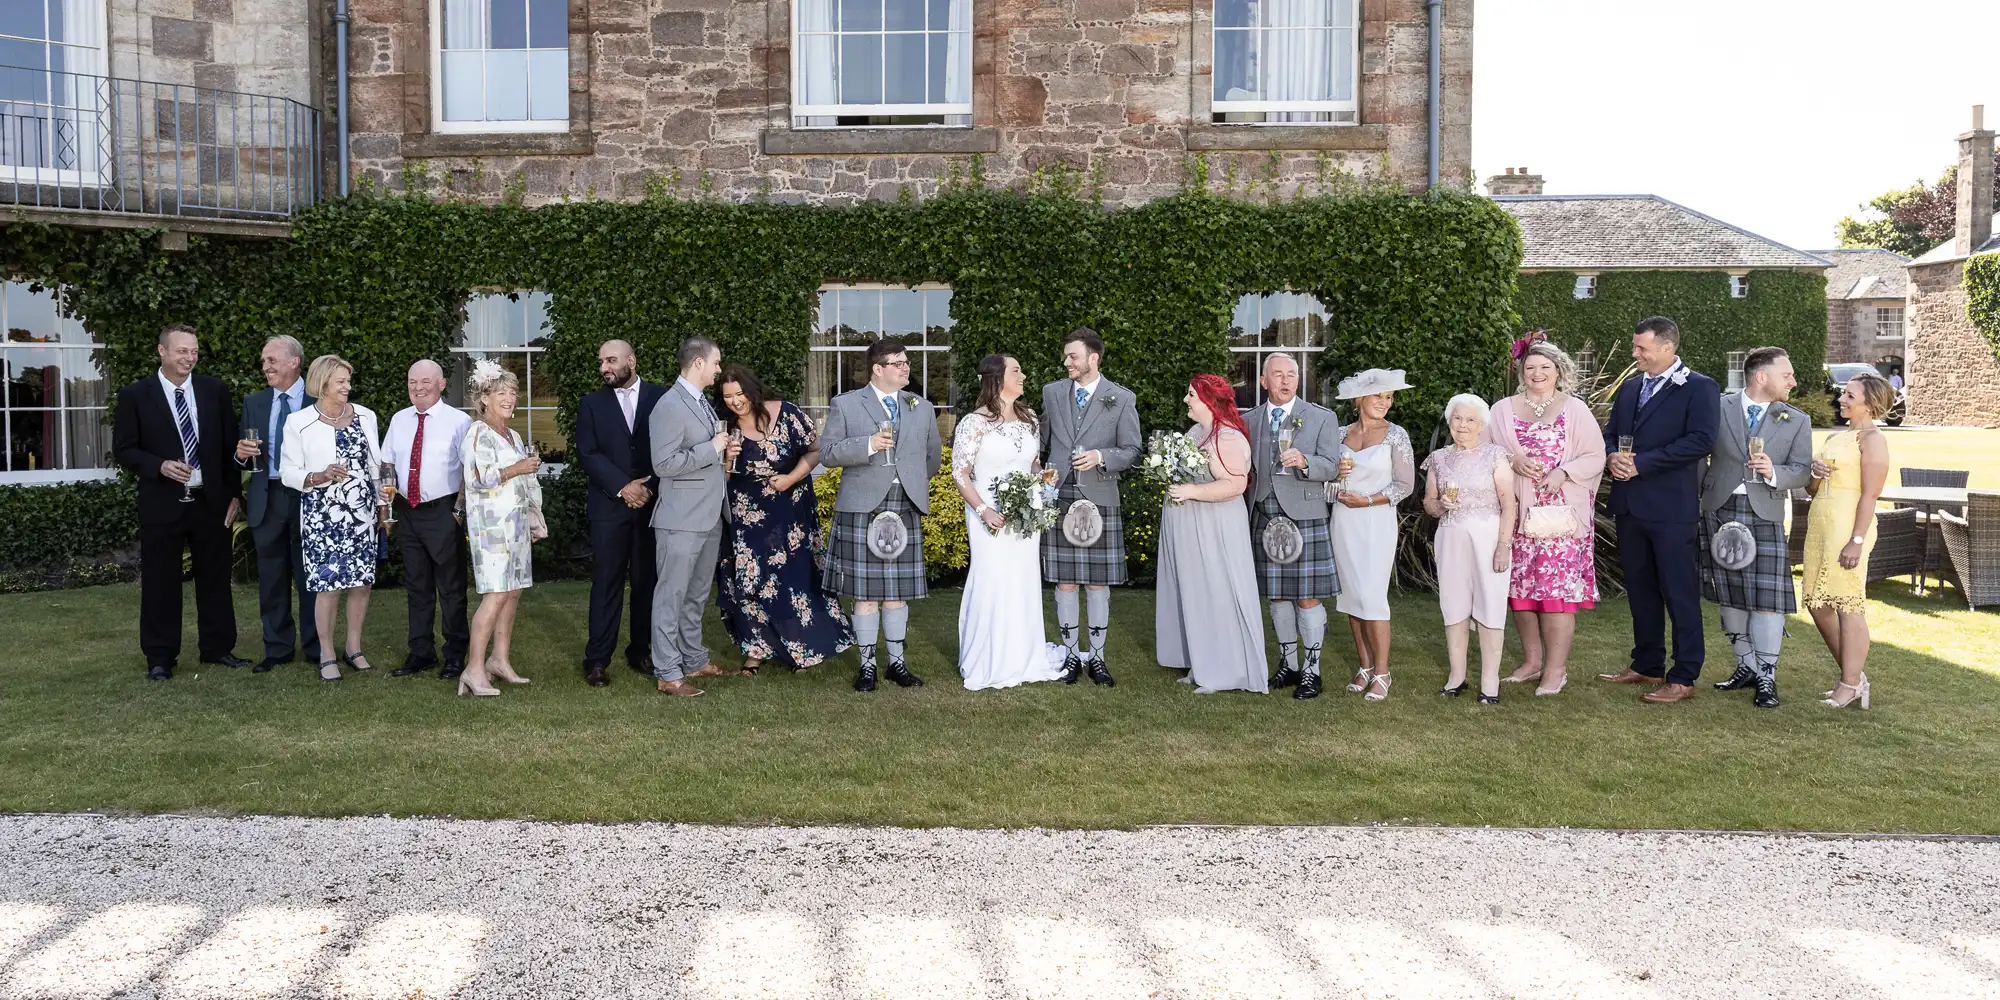 A group of wedding guests holding hats stands in front of a stone building on a sunny day, awaiting a formal event.